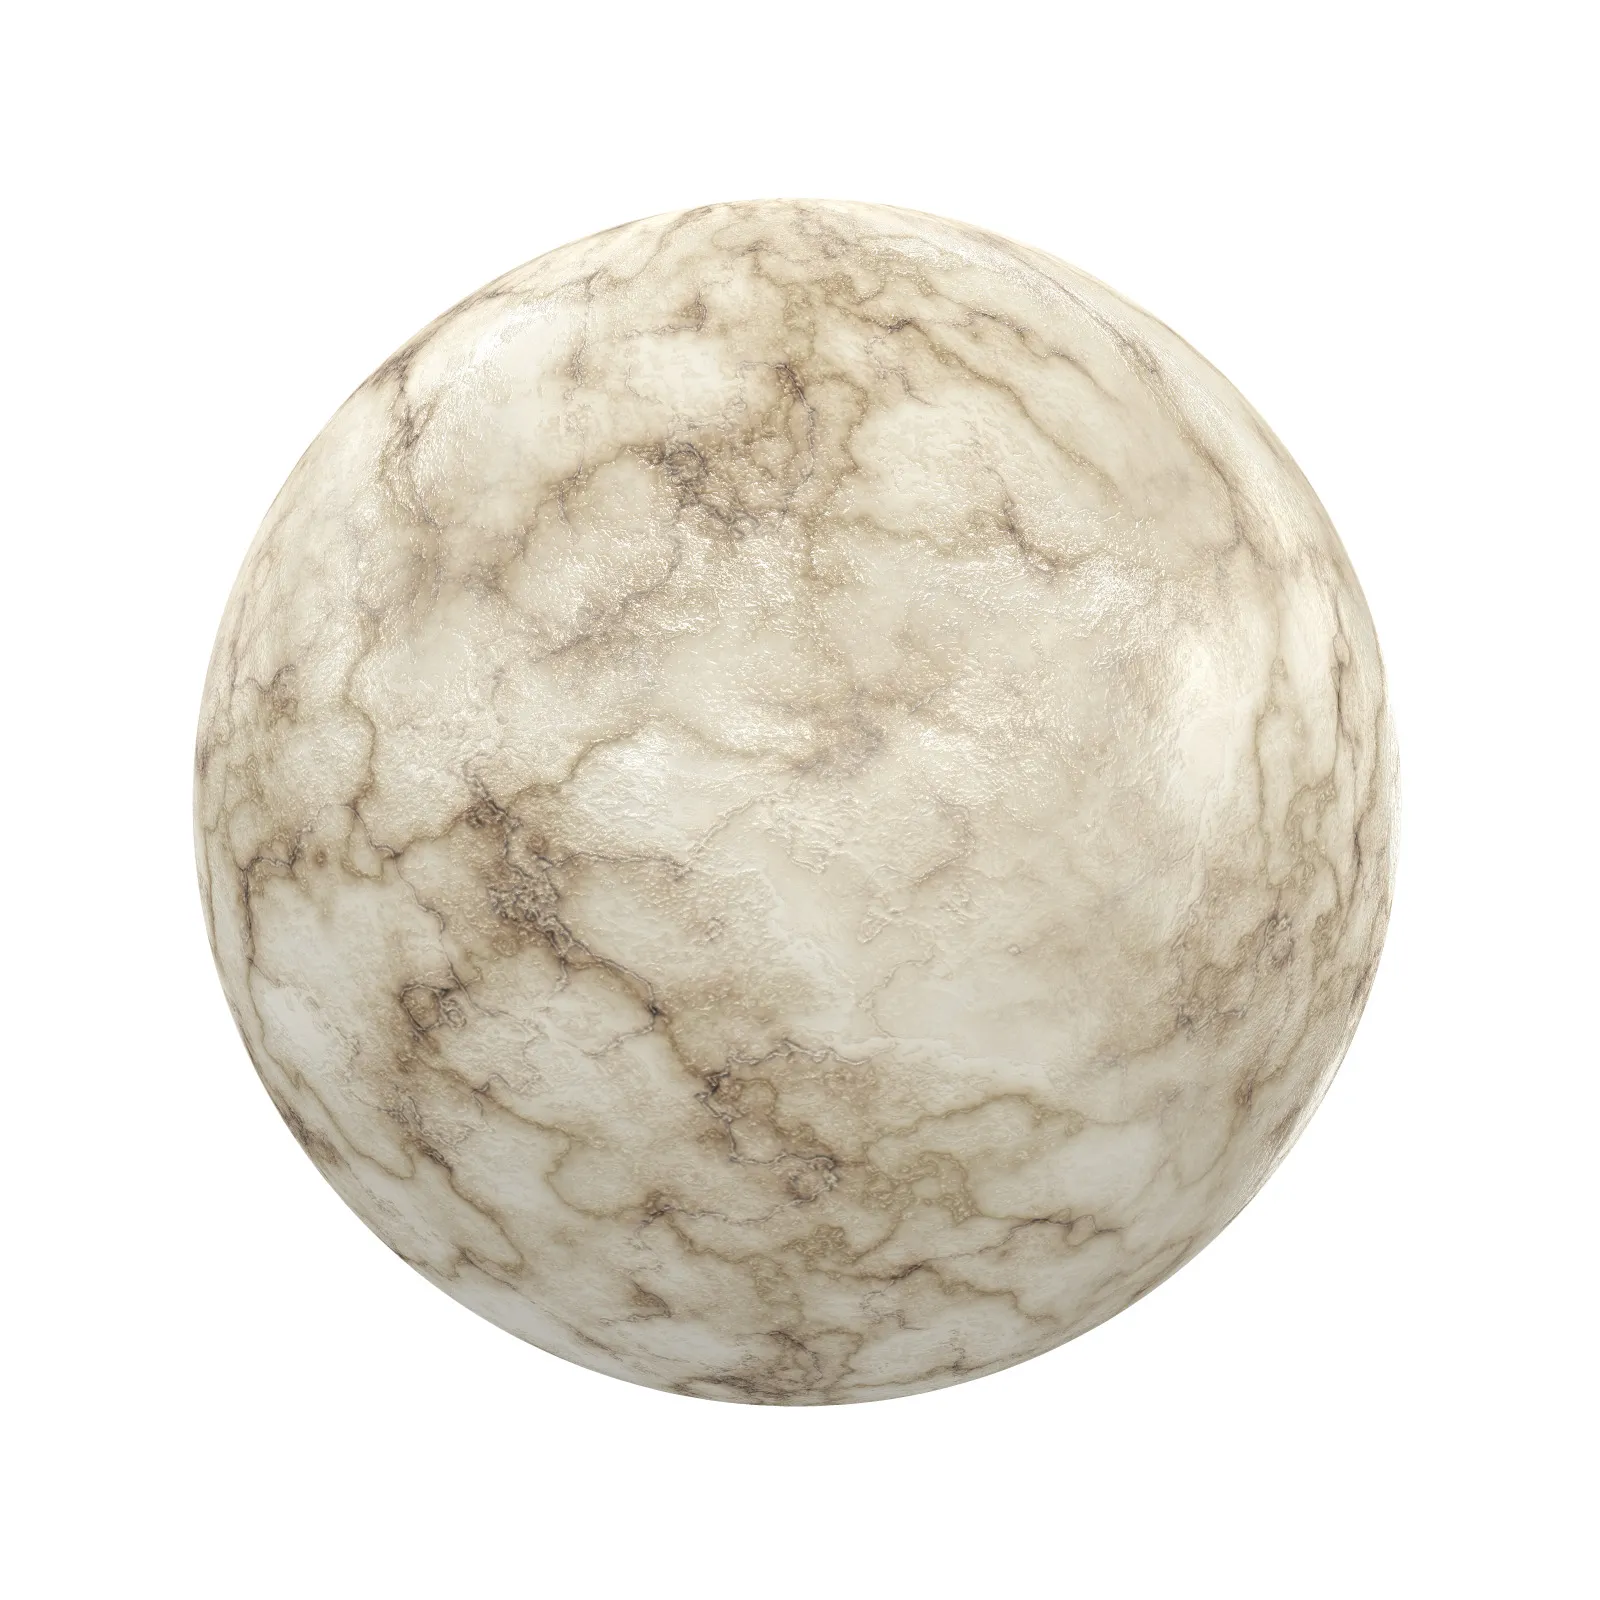 TEXTURES – STONES – CGAxis PBR Colection Vol 1 Stones – beige rough marble